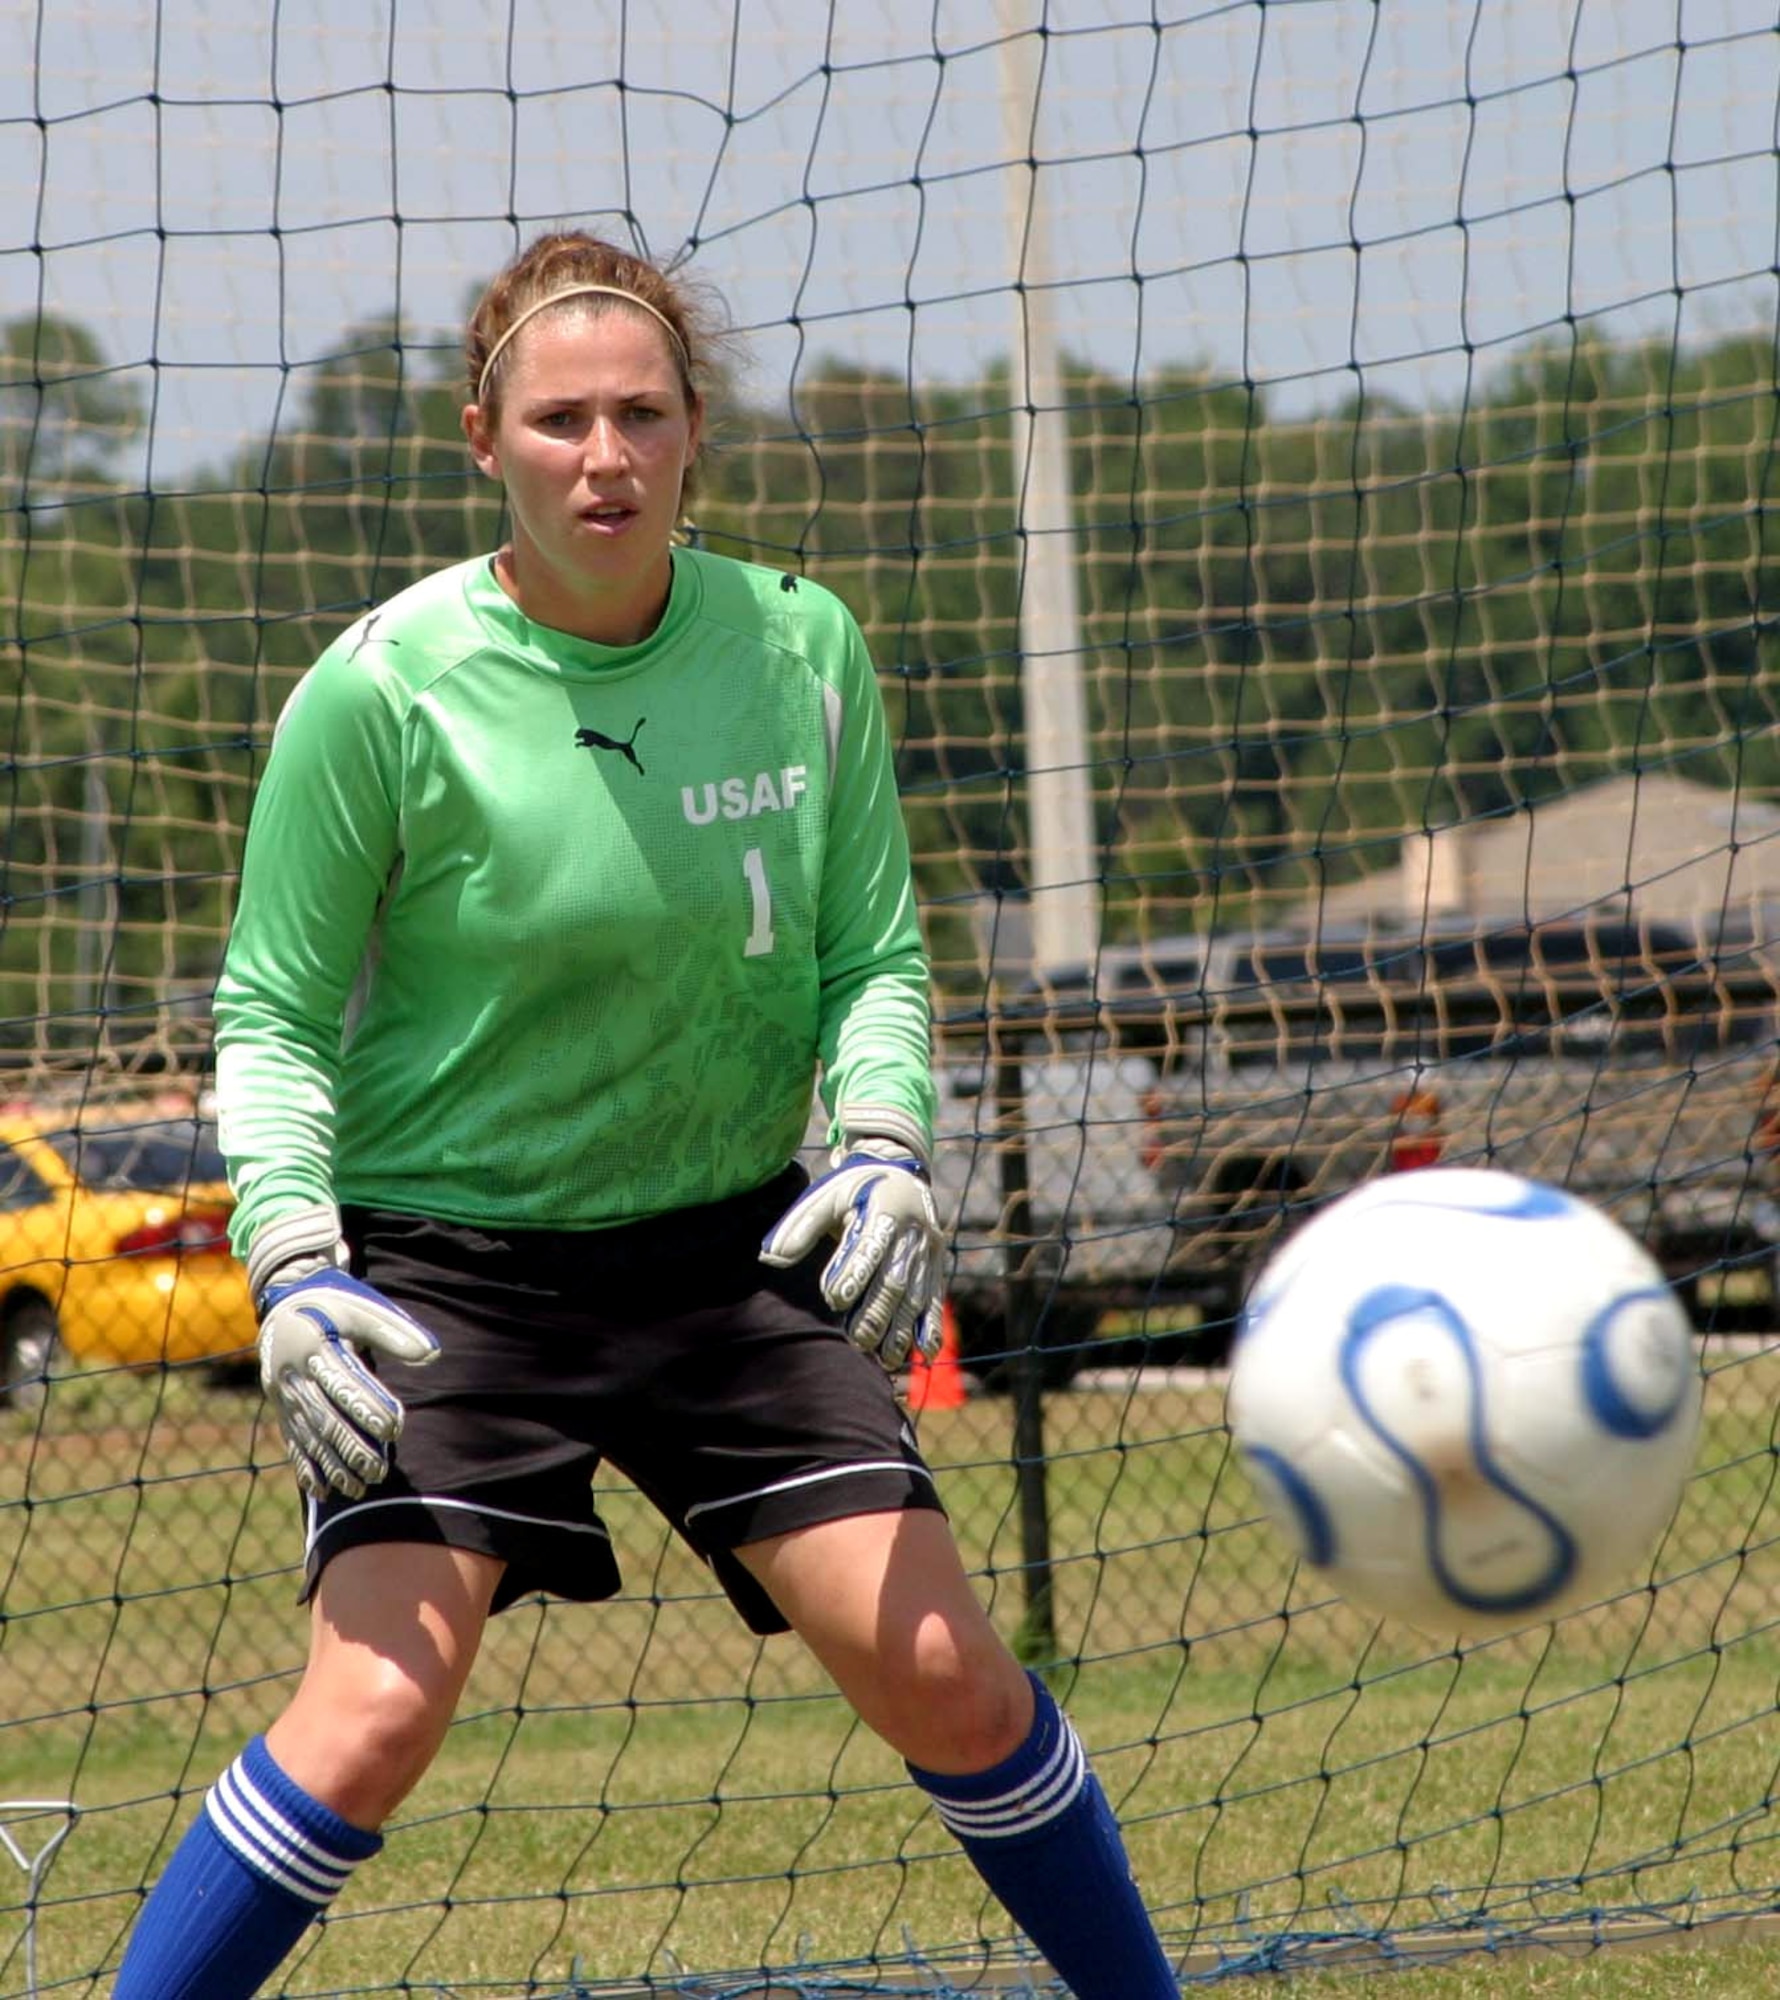 Jennifer Wolf blocks a shot during the 2006 armed forces women's soccer championship at Naval Station Mayport, Fla. The Air Force team won the tournament, held May 2 to 8.  Wolf, from Corpus Christi Naval Air Station, Texas, was selected to the all-tournament team. (U.S. Air Force photo)
